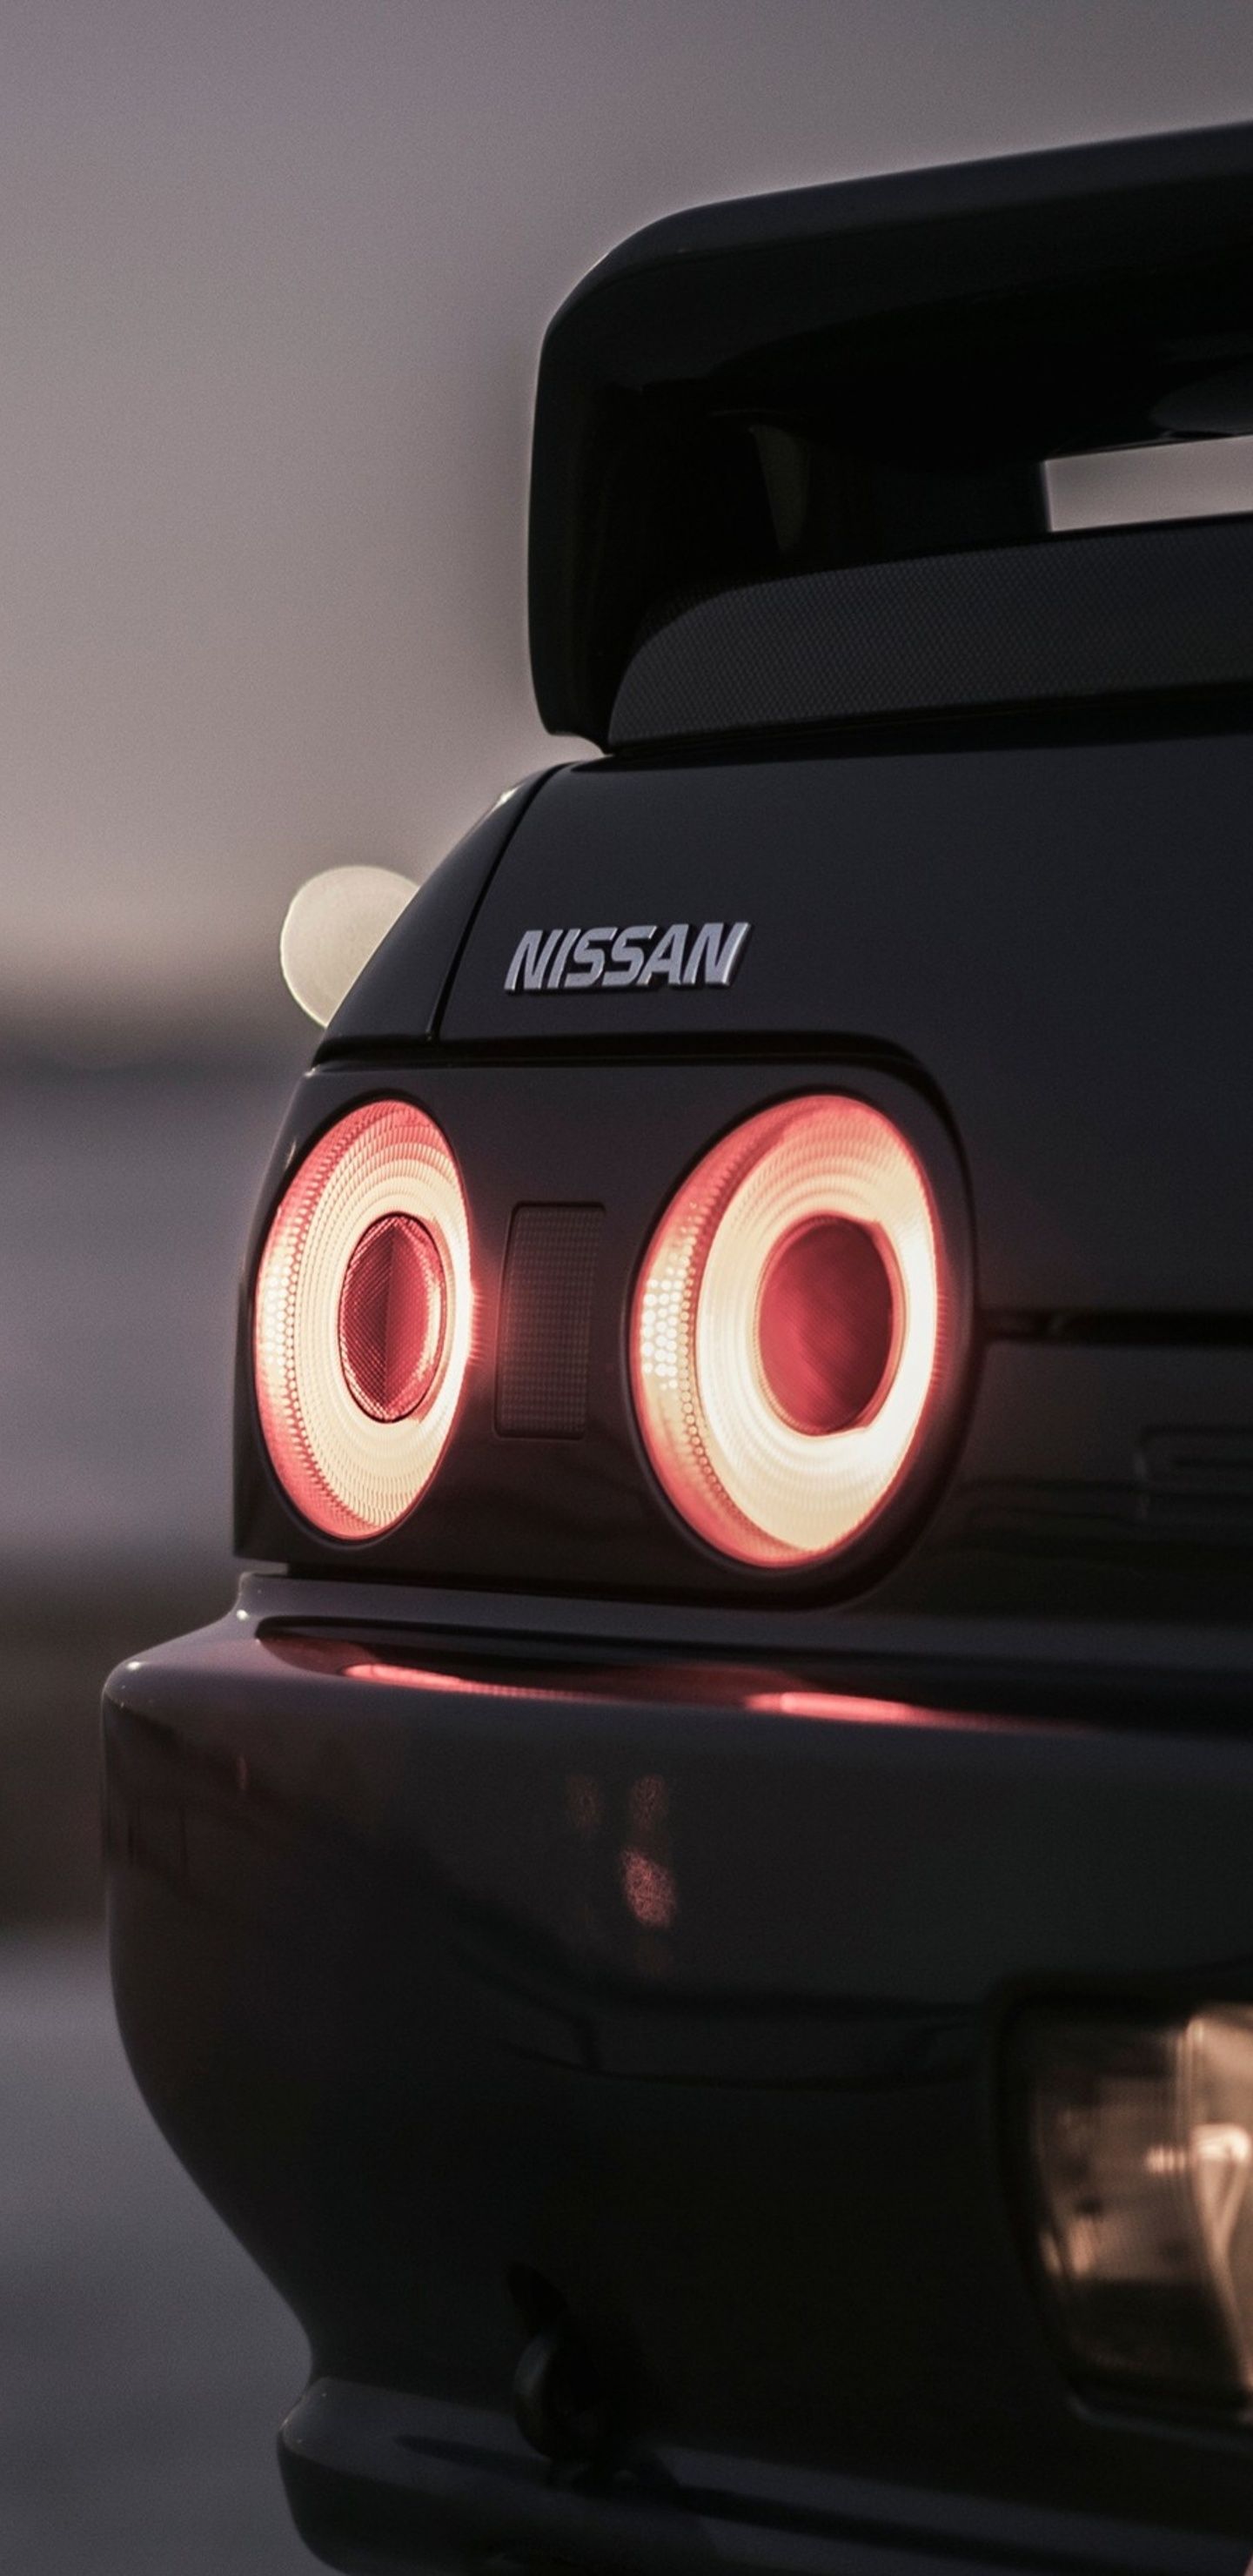 R32 Skyline Wallpapers Wallpaper Cave